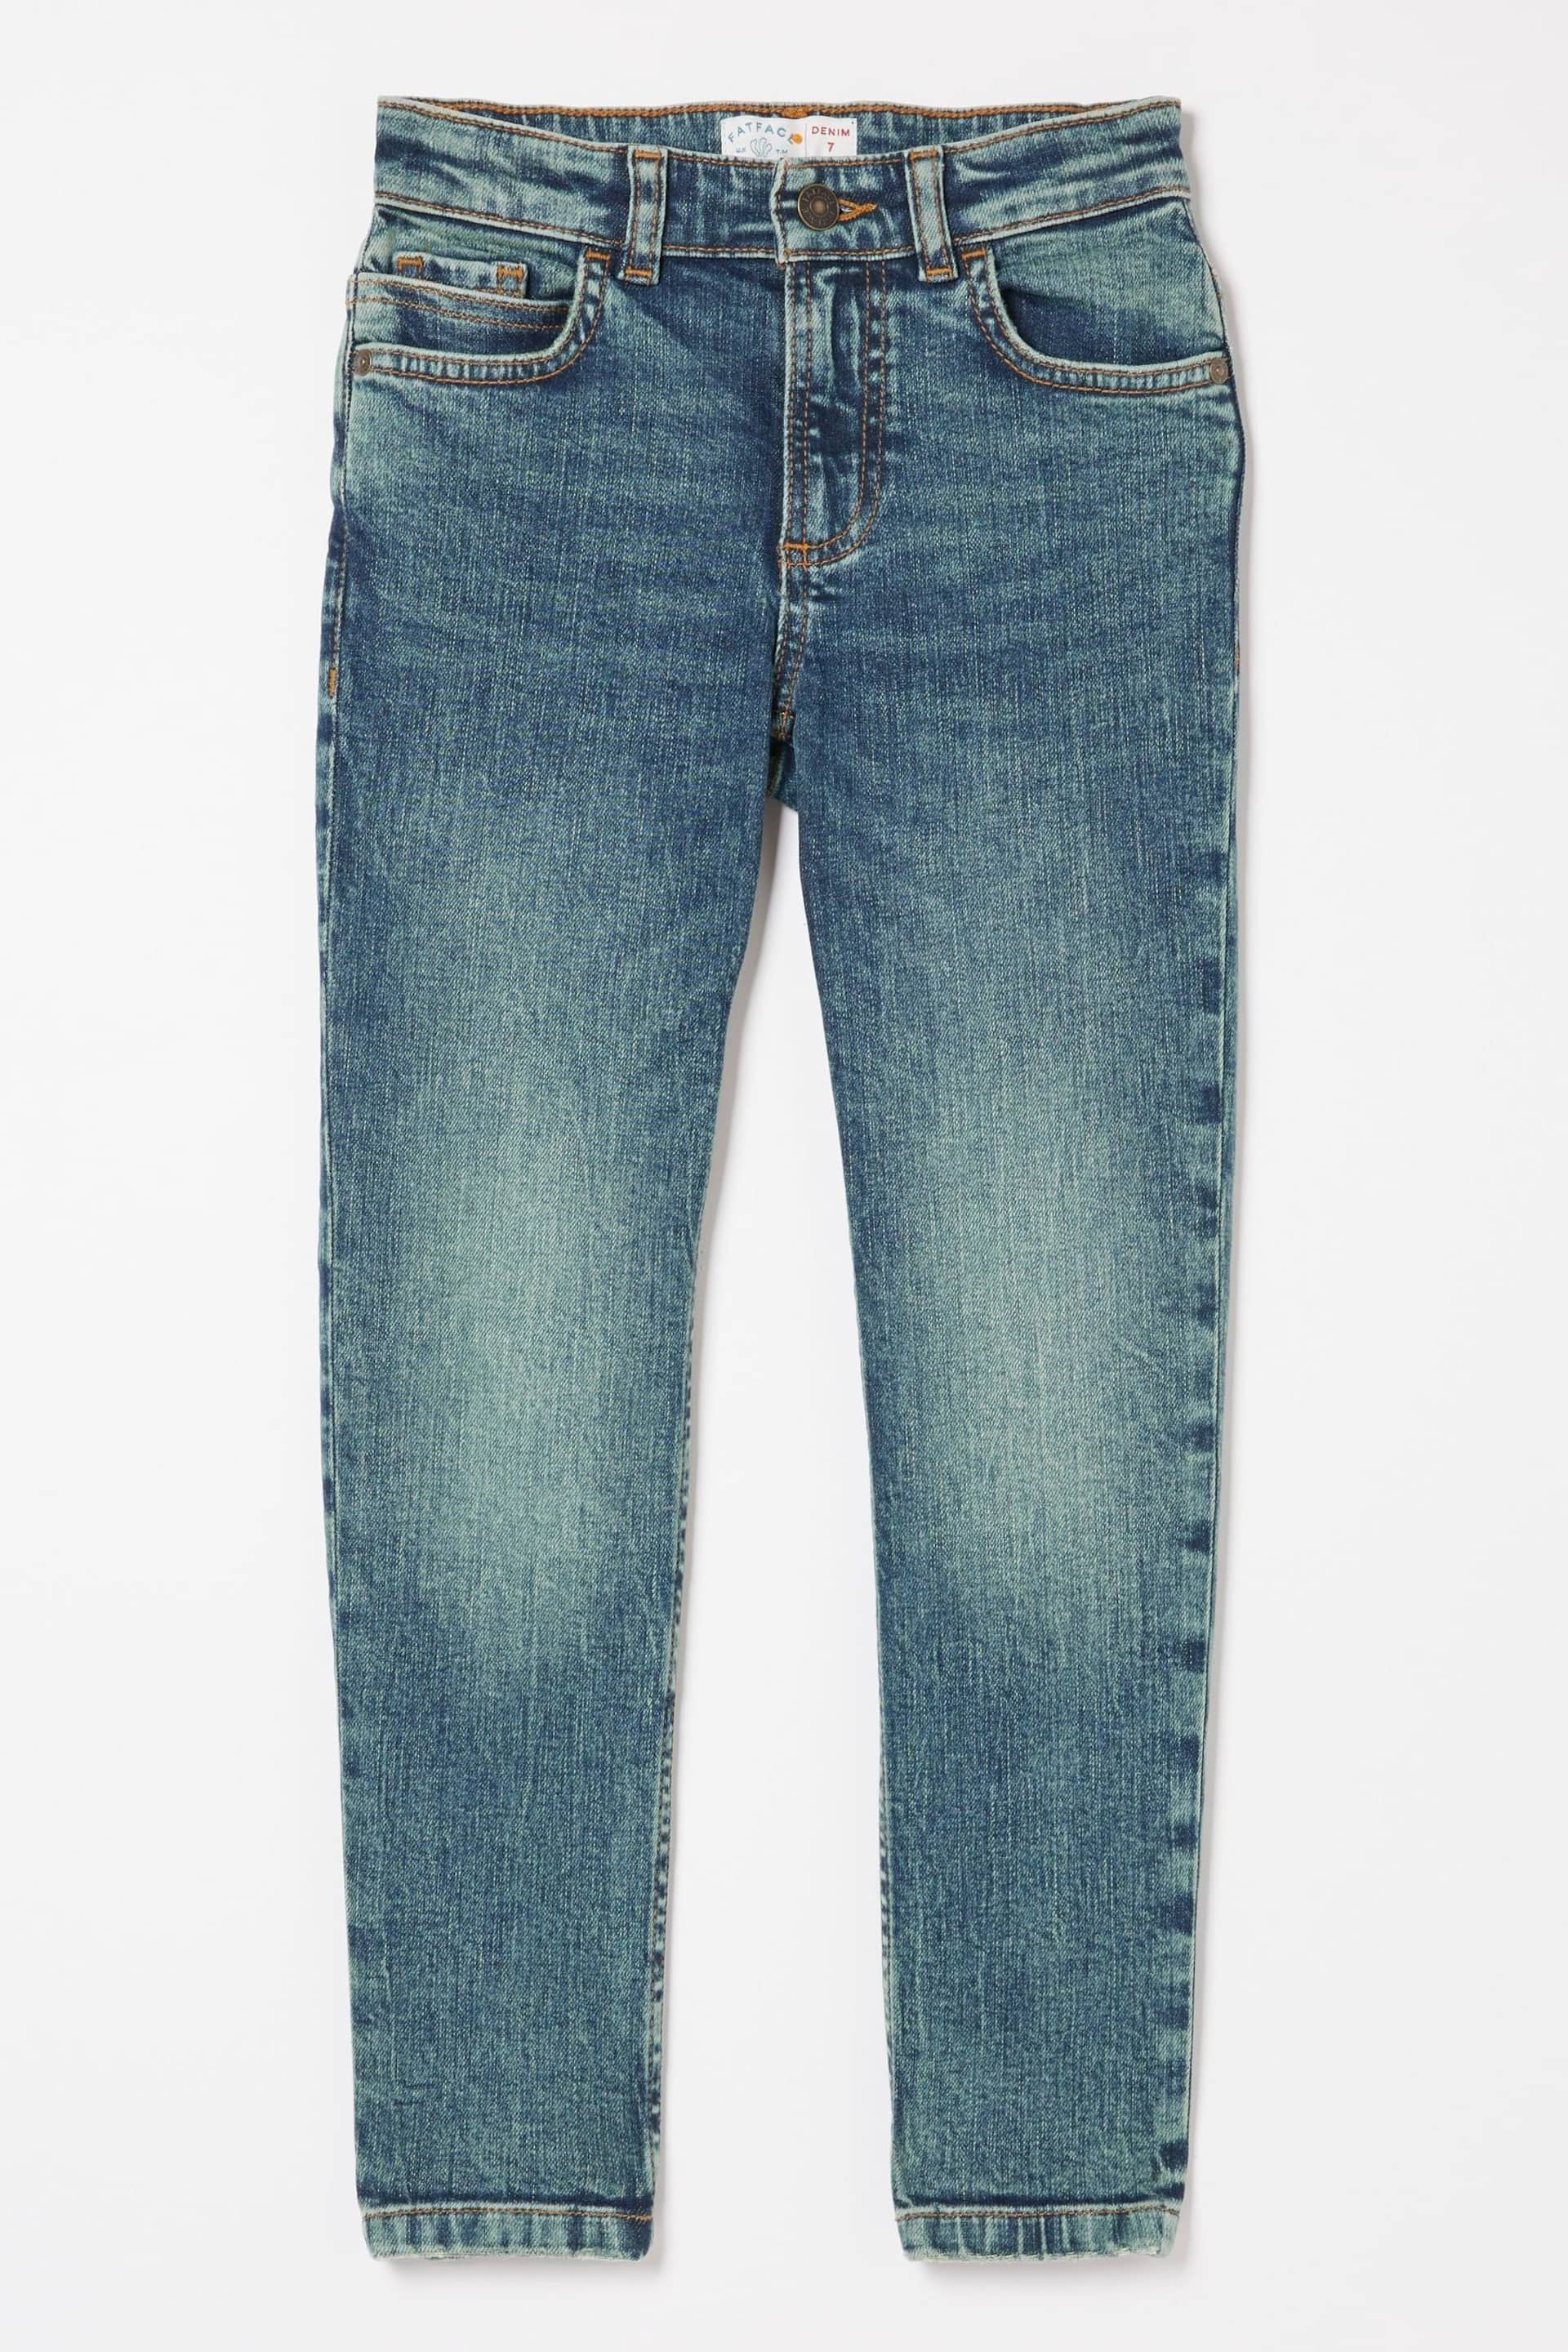 FatFace Blue Slim Seth Washed Jeans - Image 5 of 5